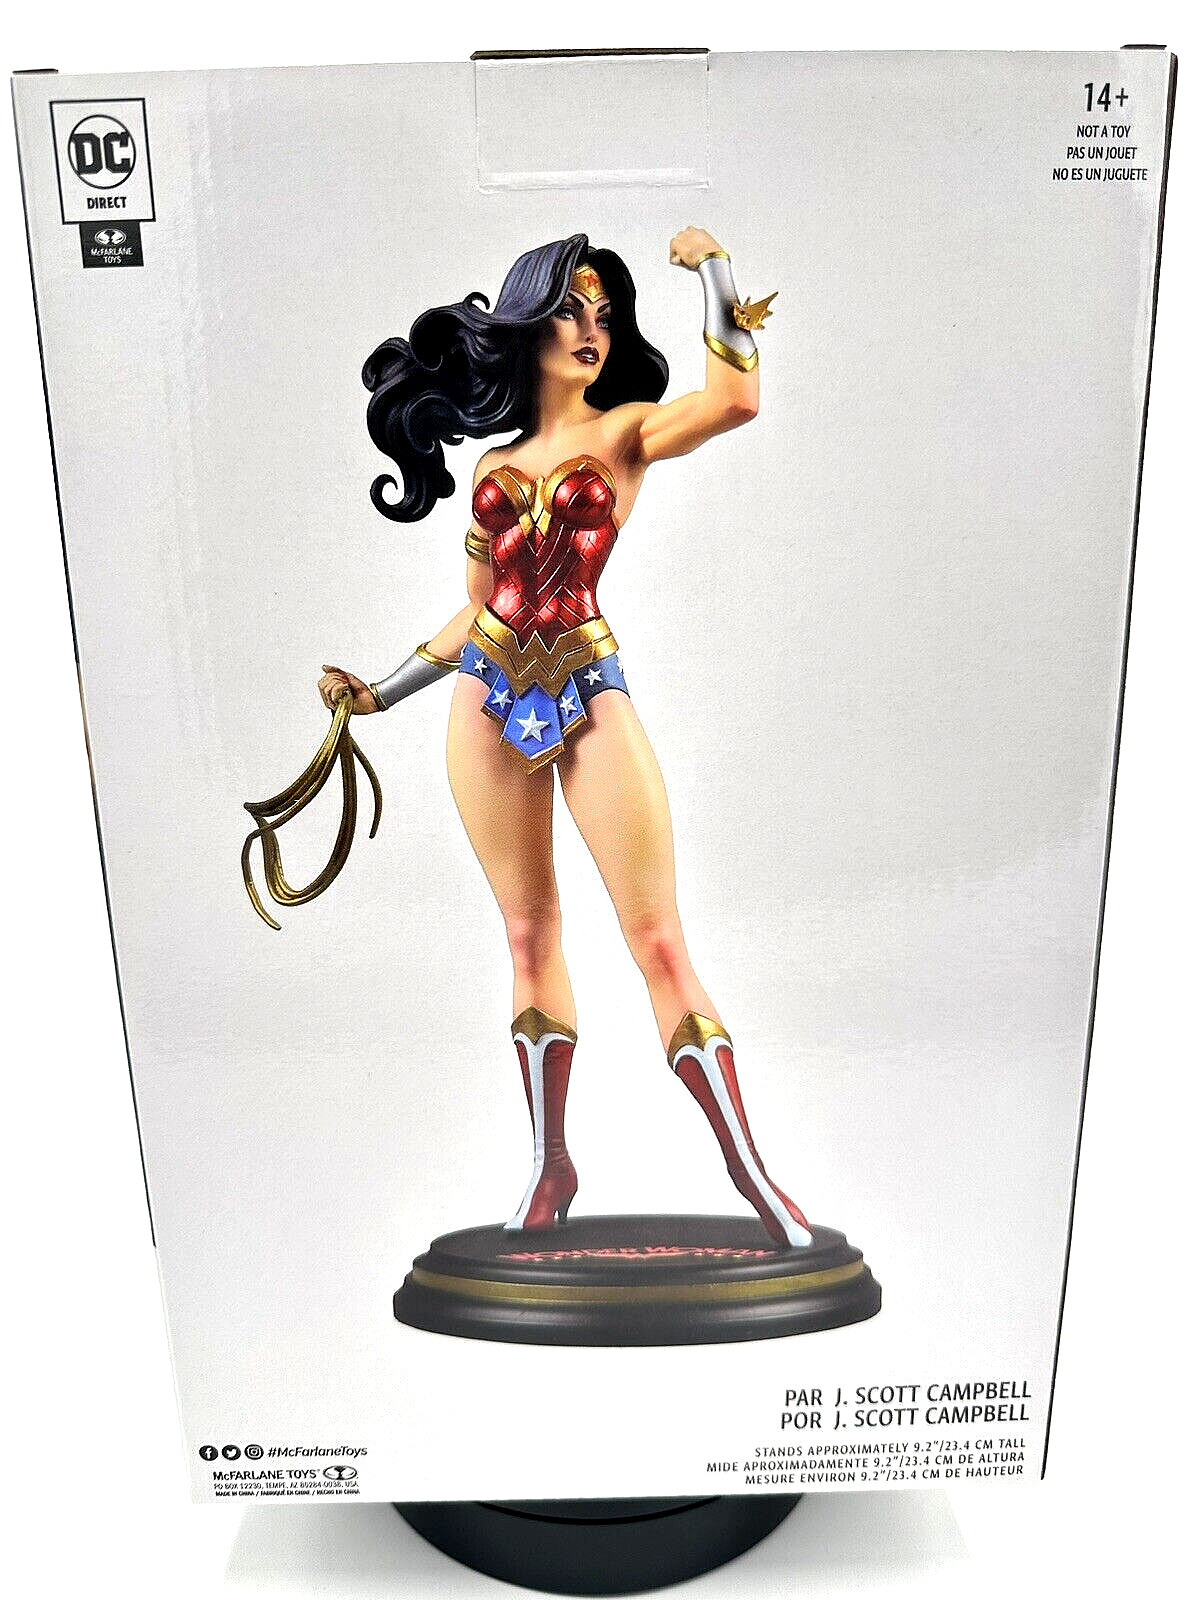 McFarlane Toys - Wonder Woman 9.2”By J. Scott Campbell - Limited Edition 610/945